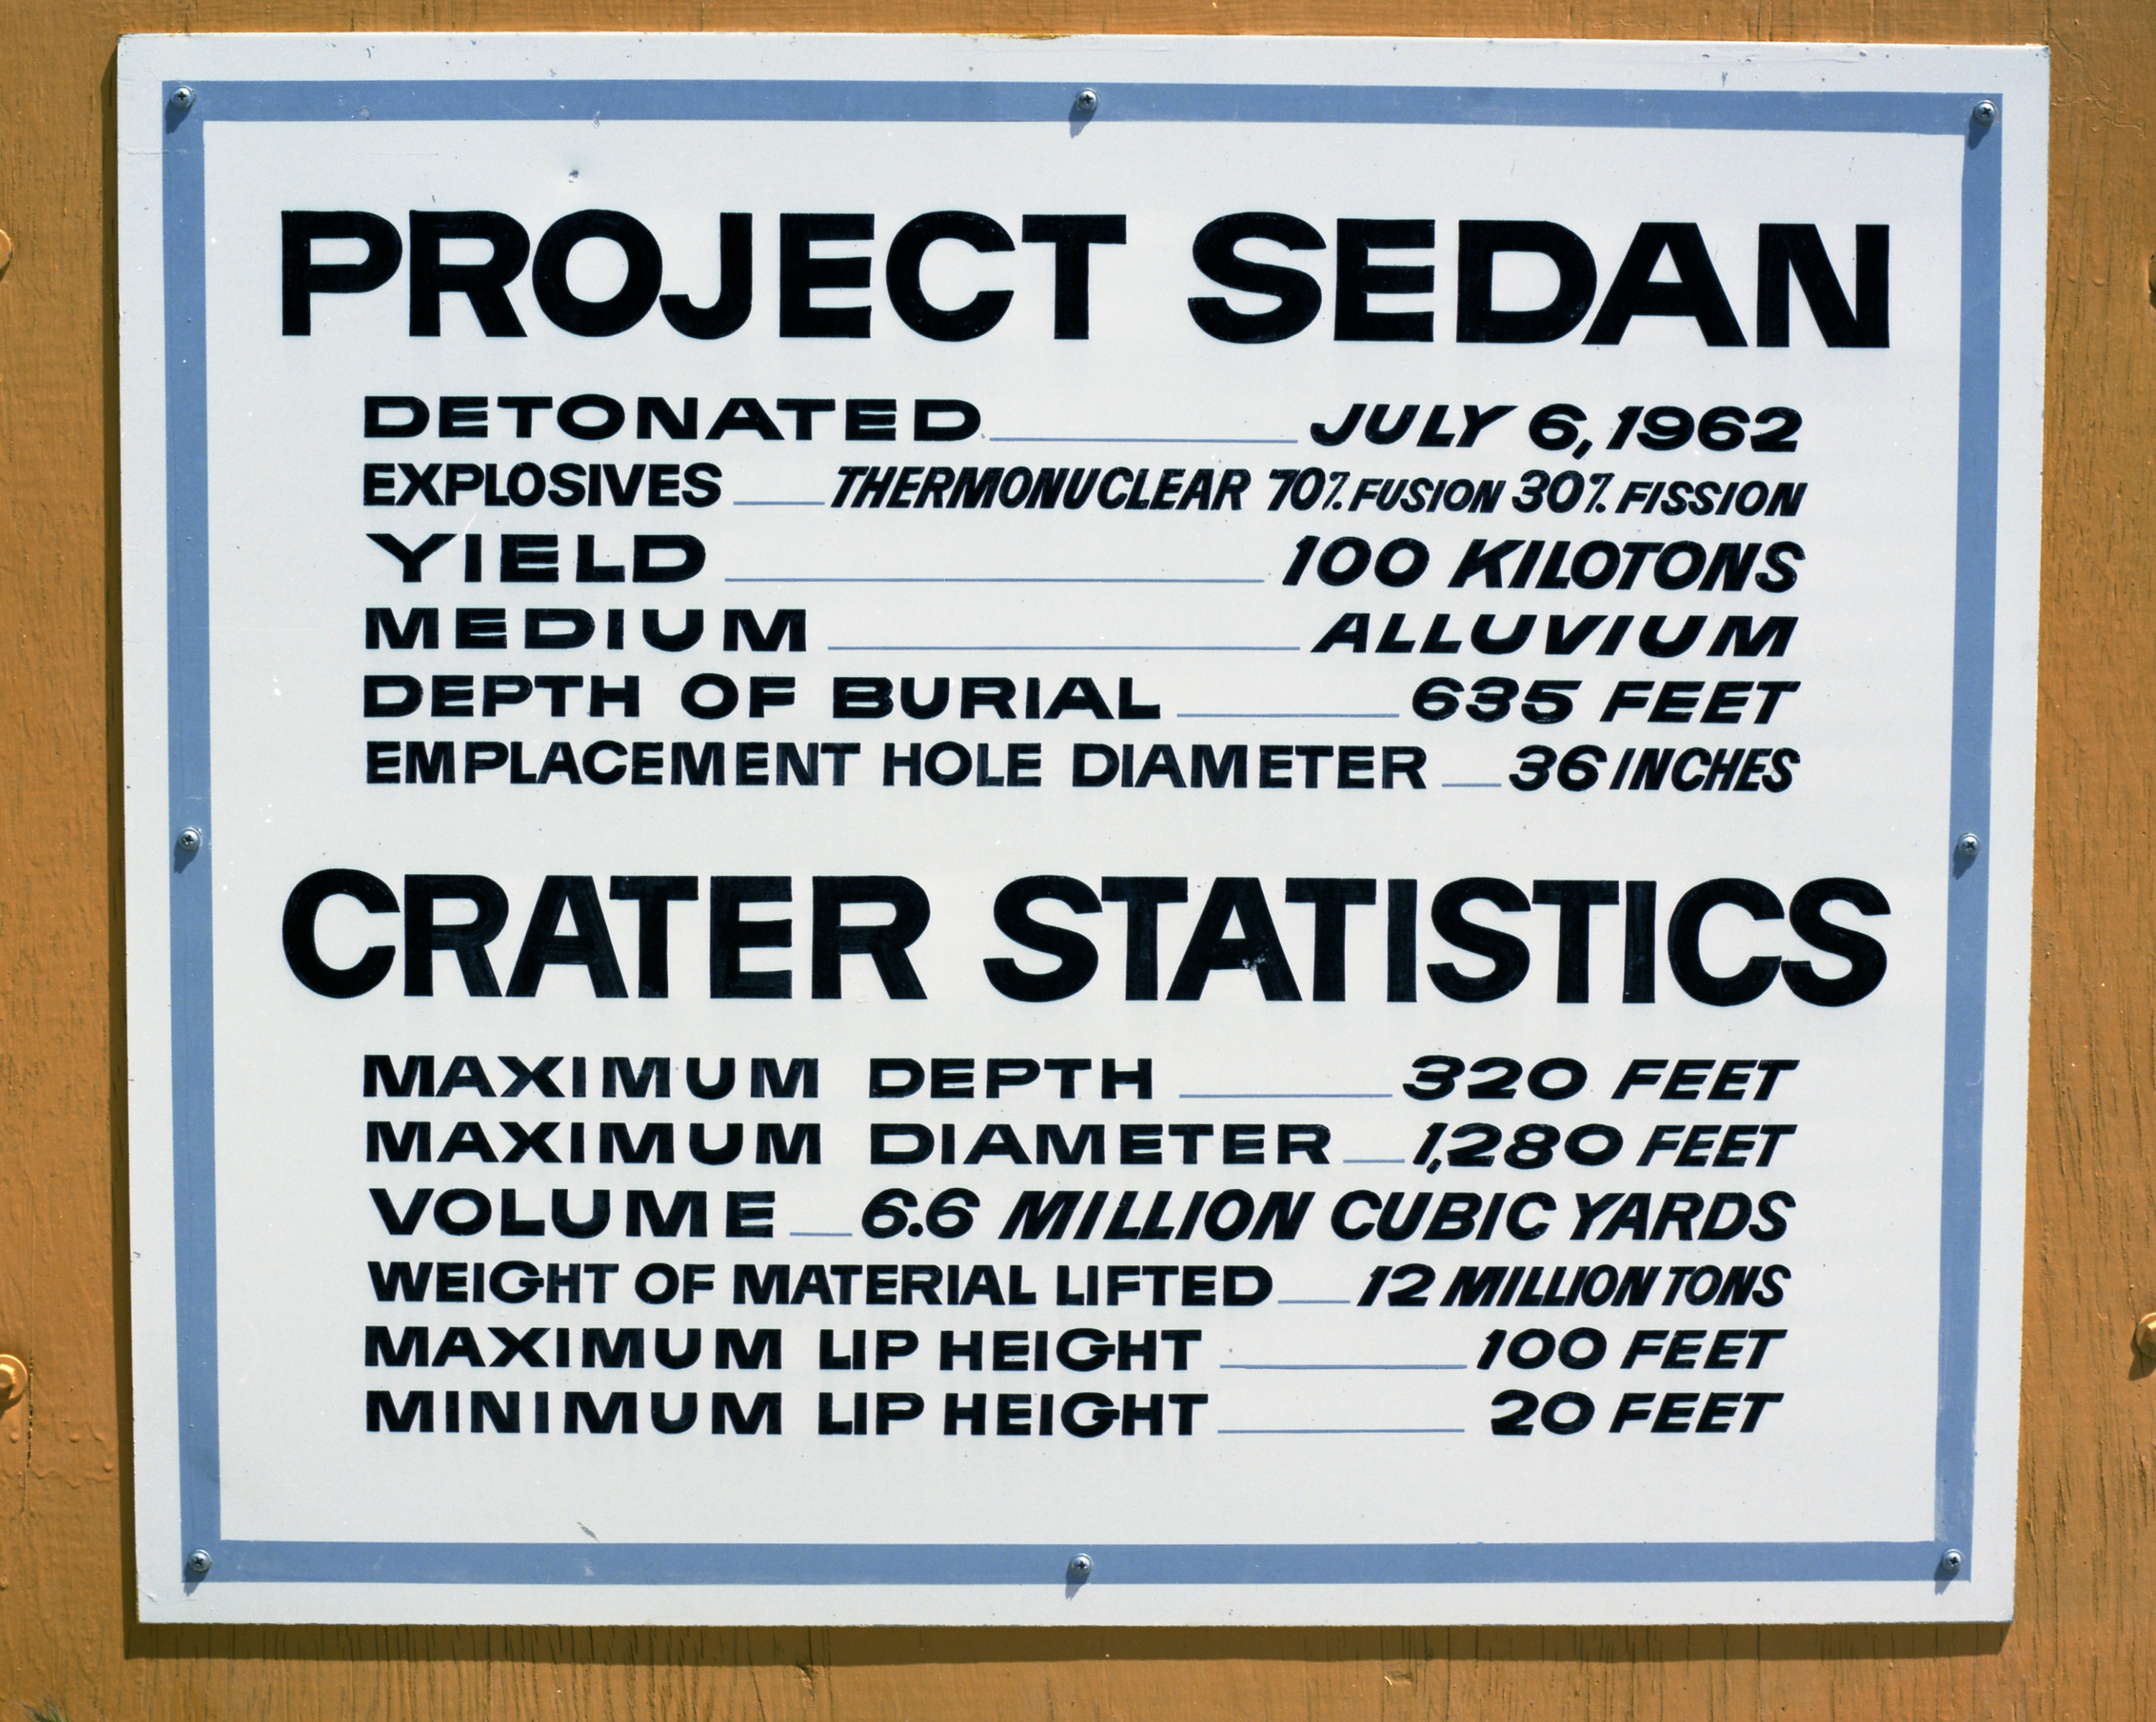 General 2999x2396 sign text 1960s military military base USA Nevada nuclear atomic bomb Nevada Test Site